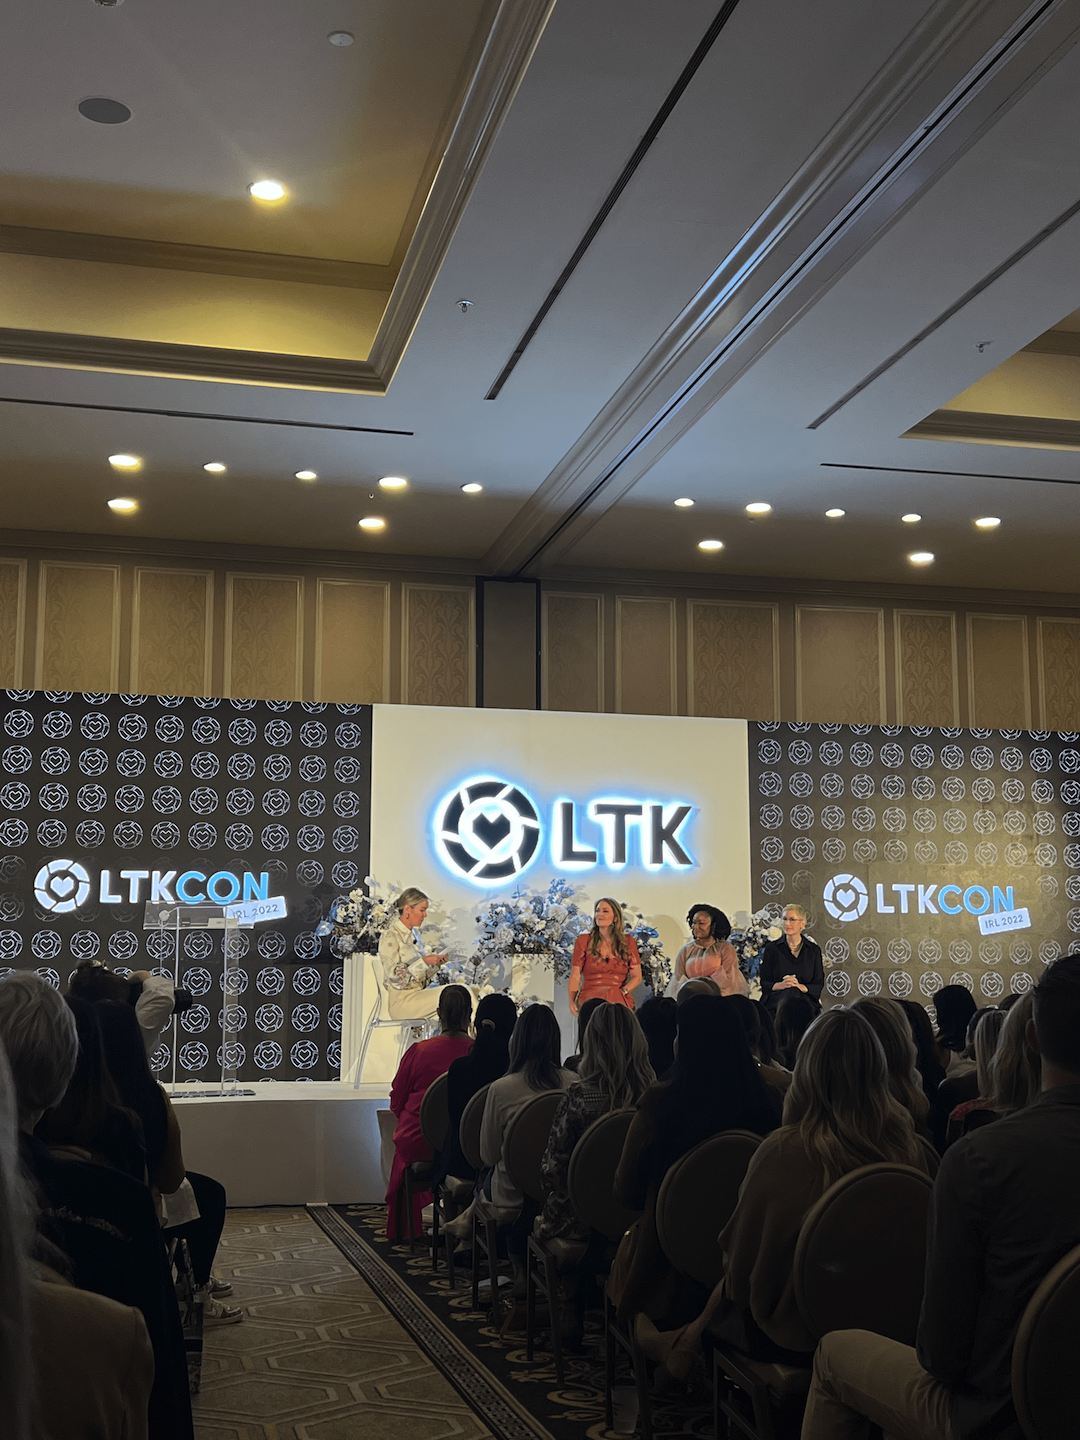 keynote speakers at the LTK Conference